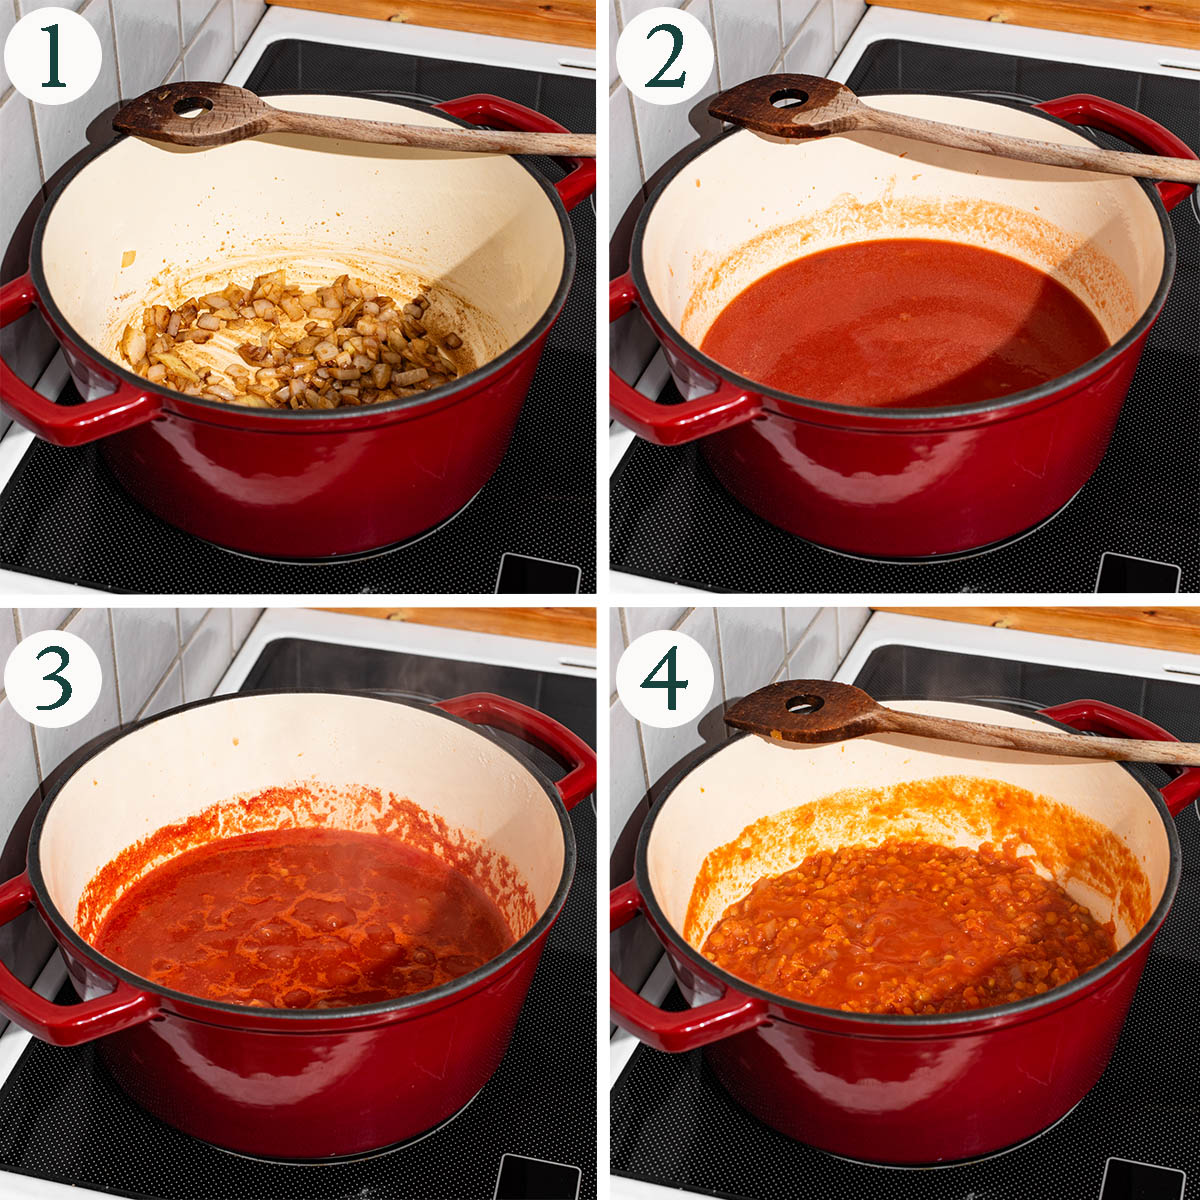 Lentil tomato sauce steps 1 to 4, cooked onions, tomato added, before and after lentils are cooked.